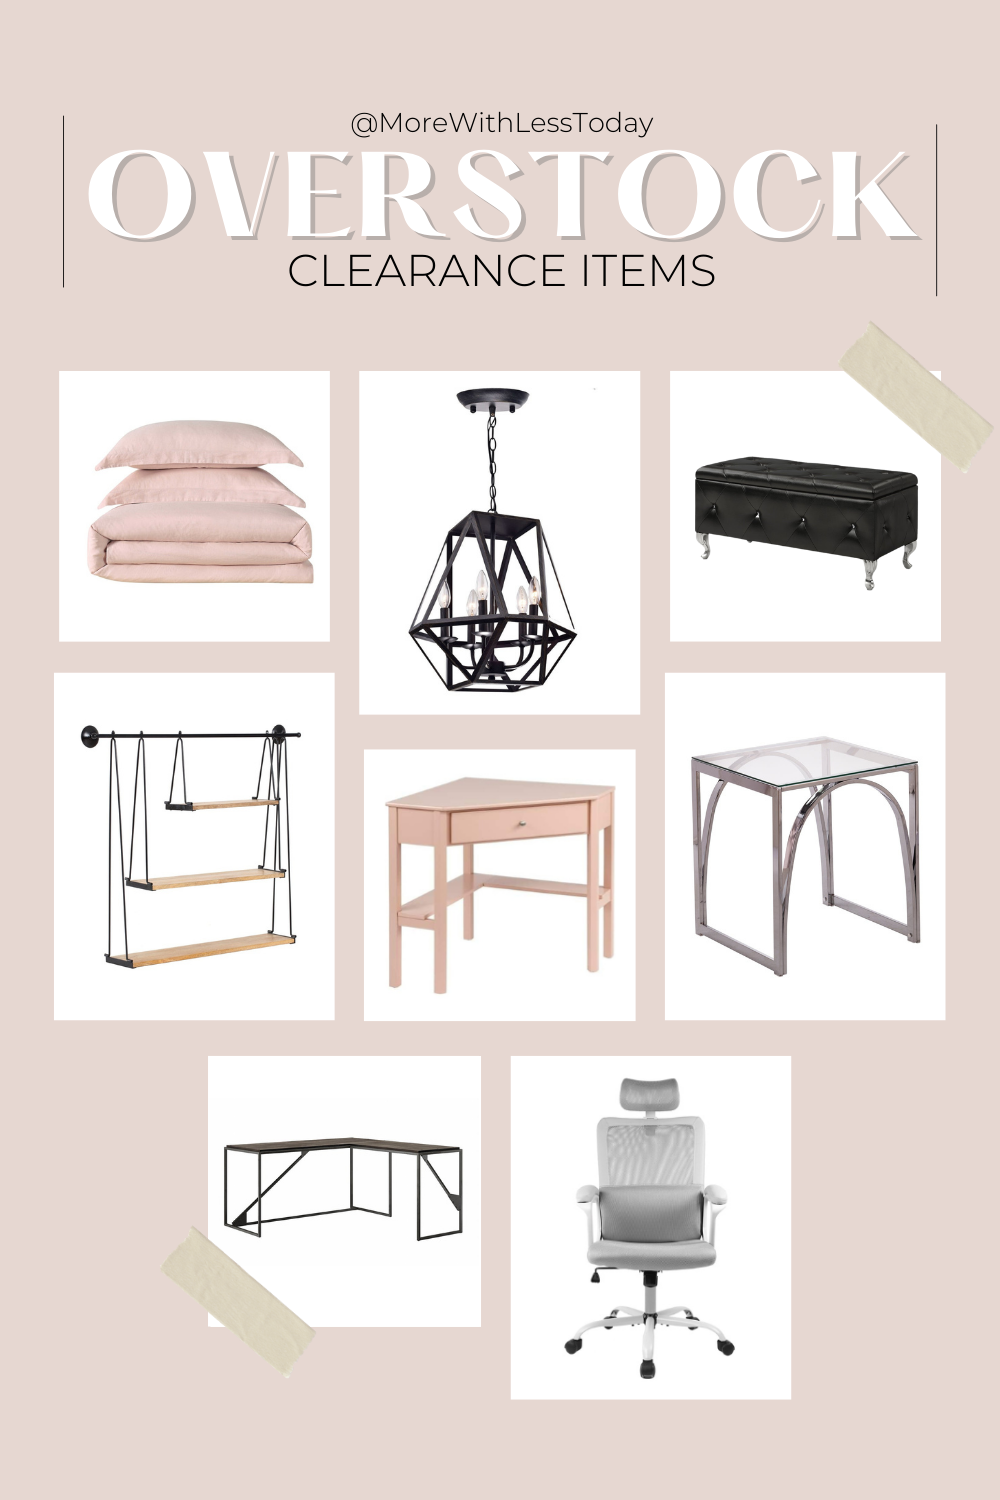 PIN for Overstock Clearance Items